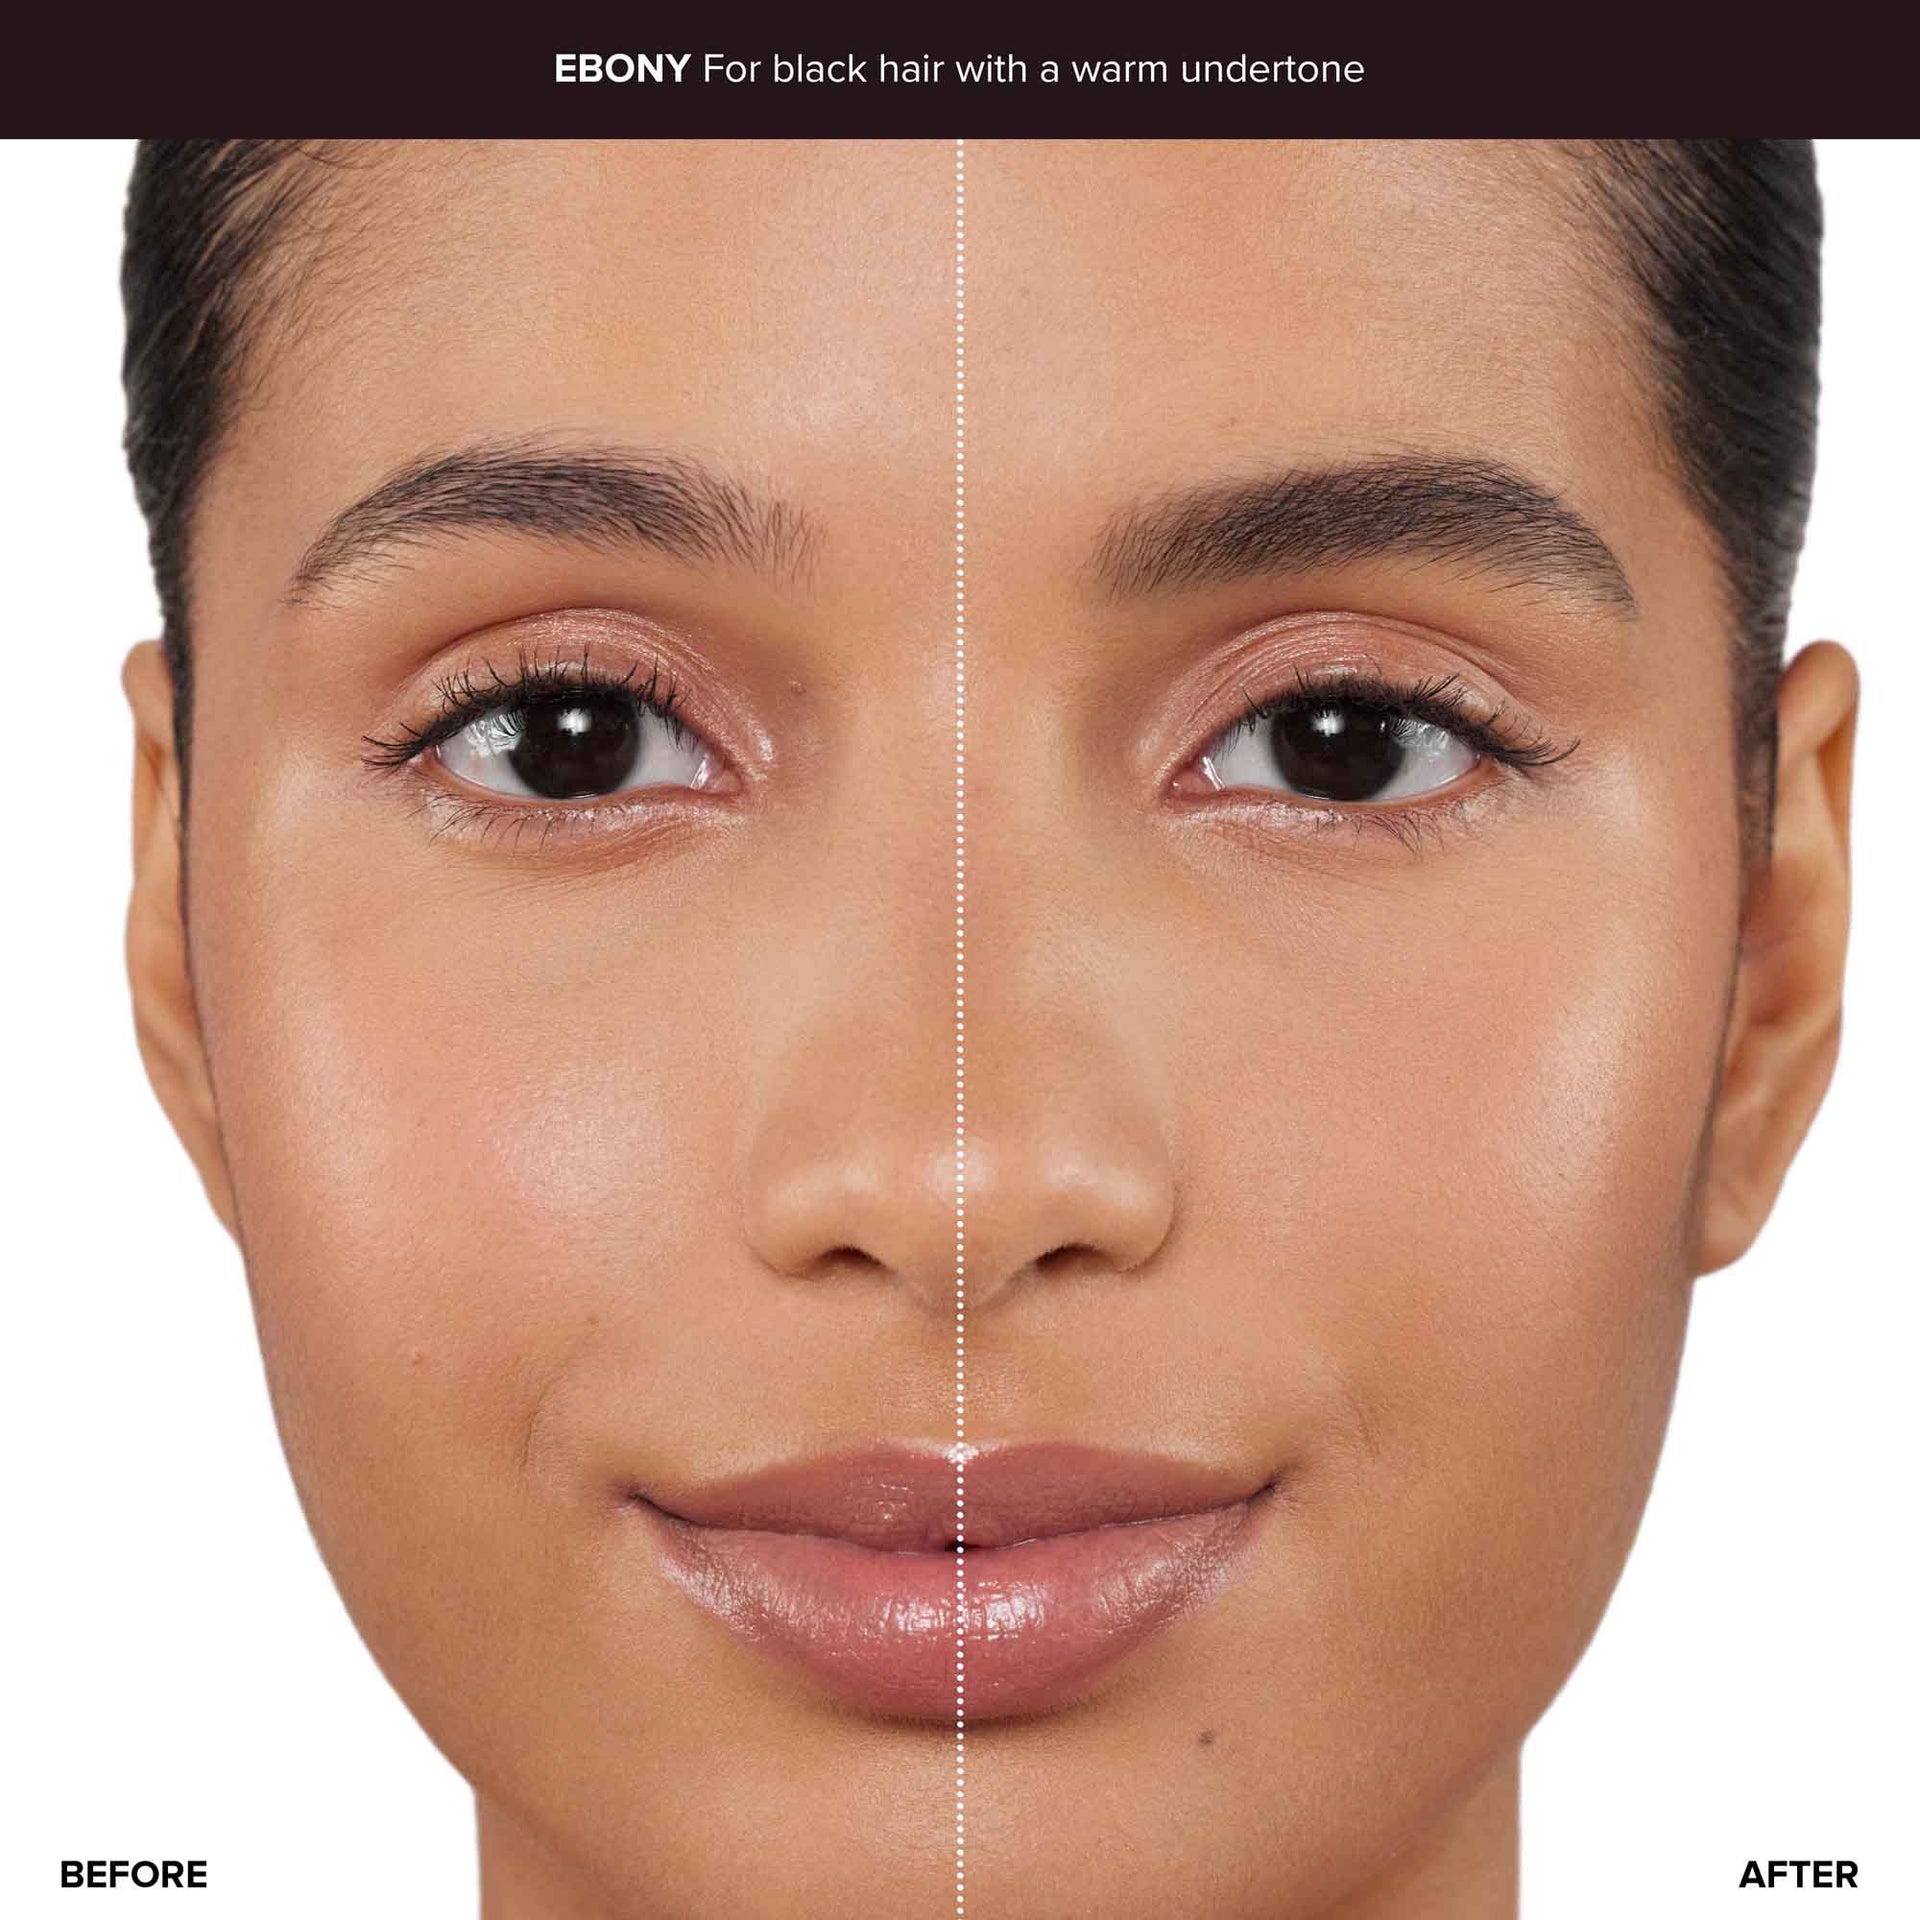 Ebony | Sculpted & Defined Brow Kit Before & After - Ebony